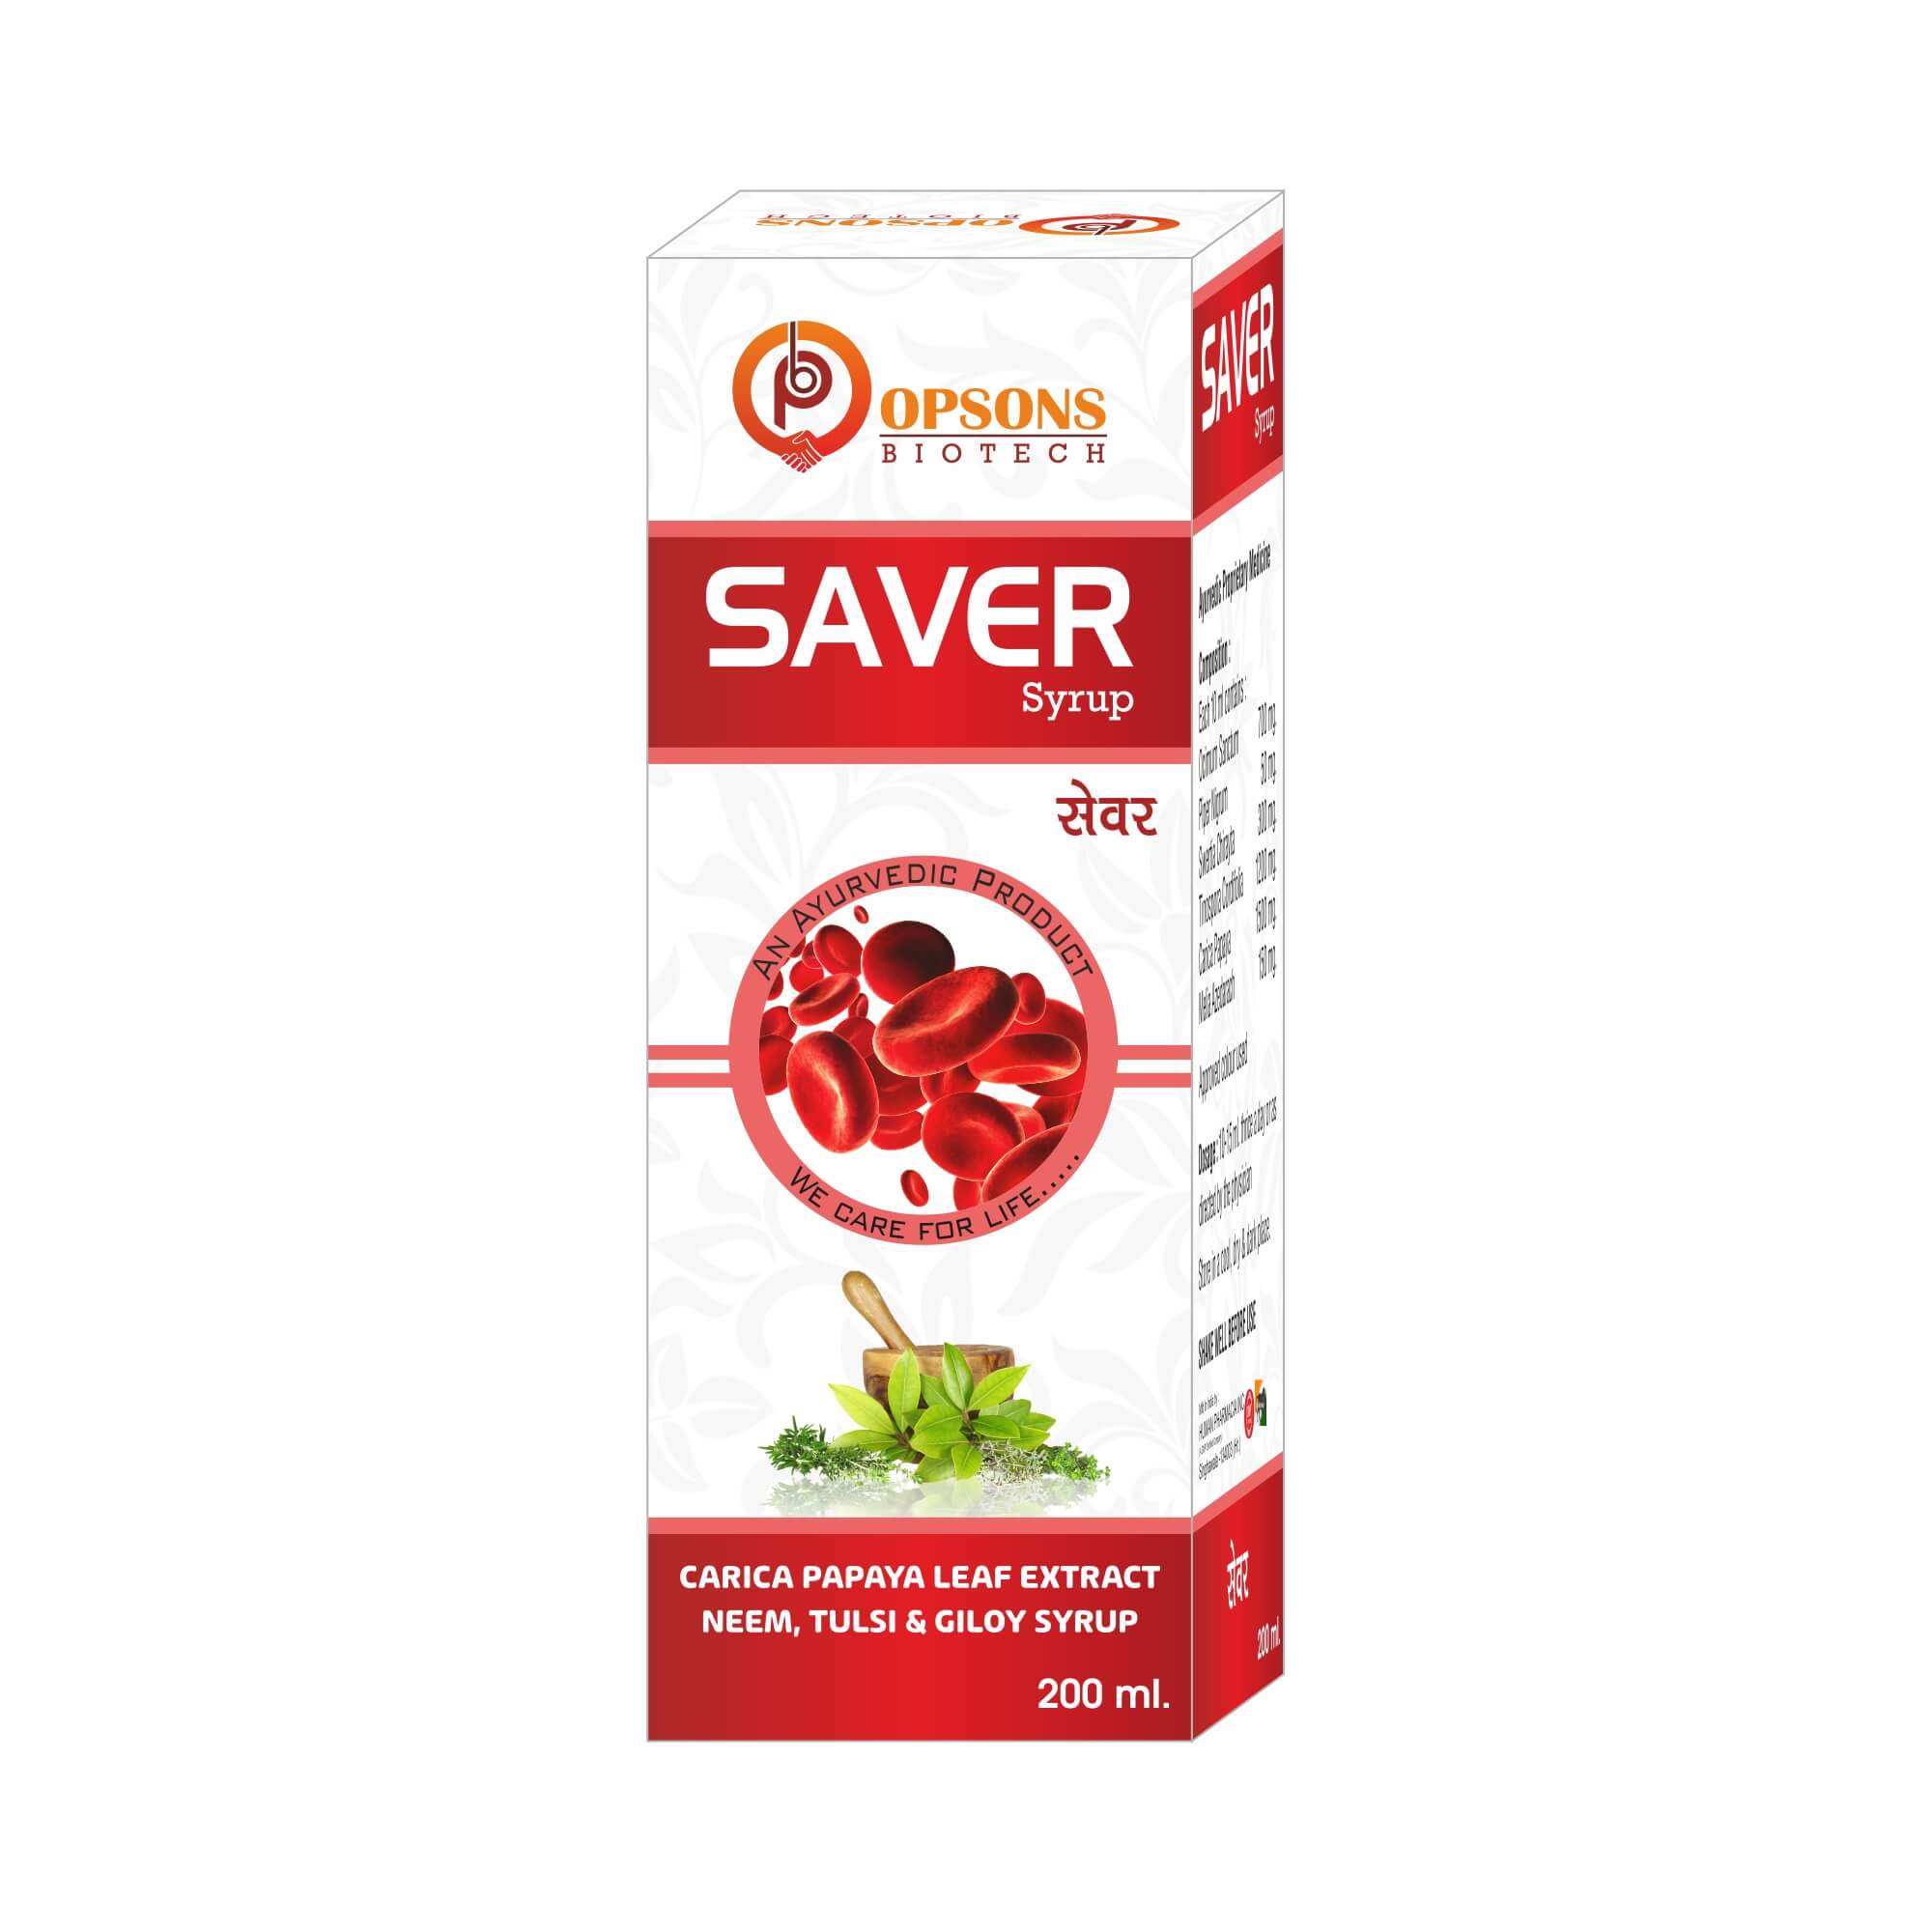 Product Name: Saver, Compositions of Saver are Crrica Papaya Leaf Extract Neem, Tulsi & Giloy Syrup - Opsons Biotech